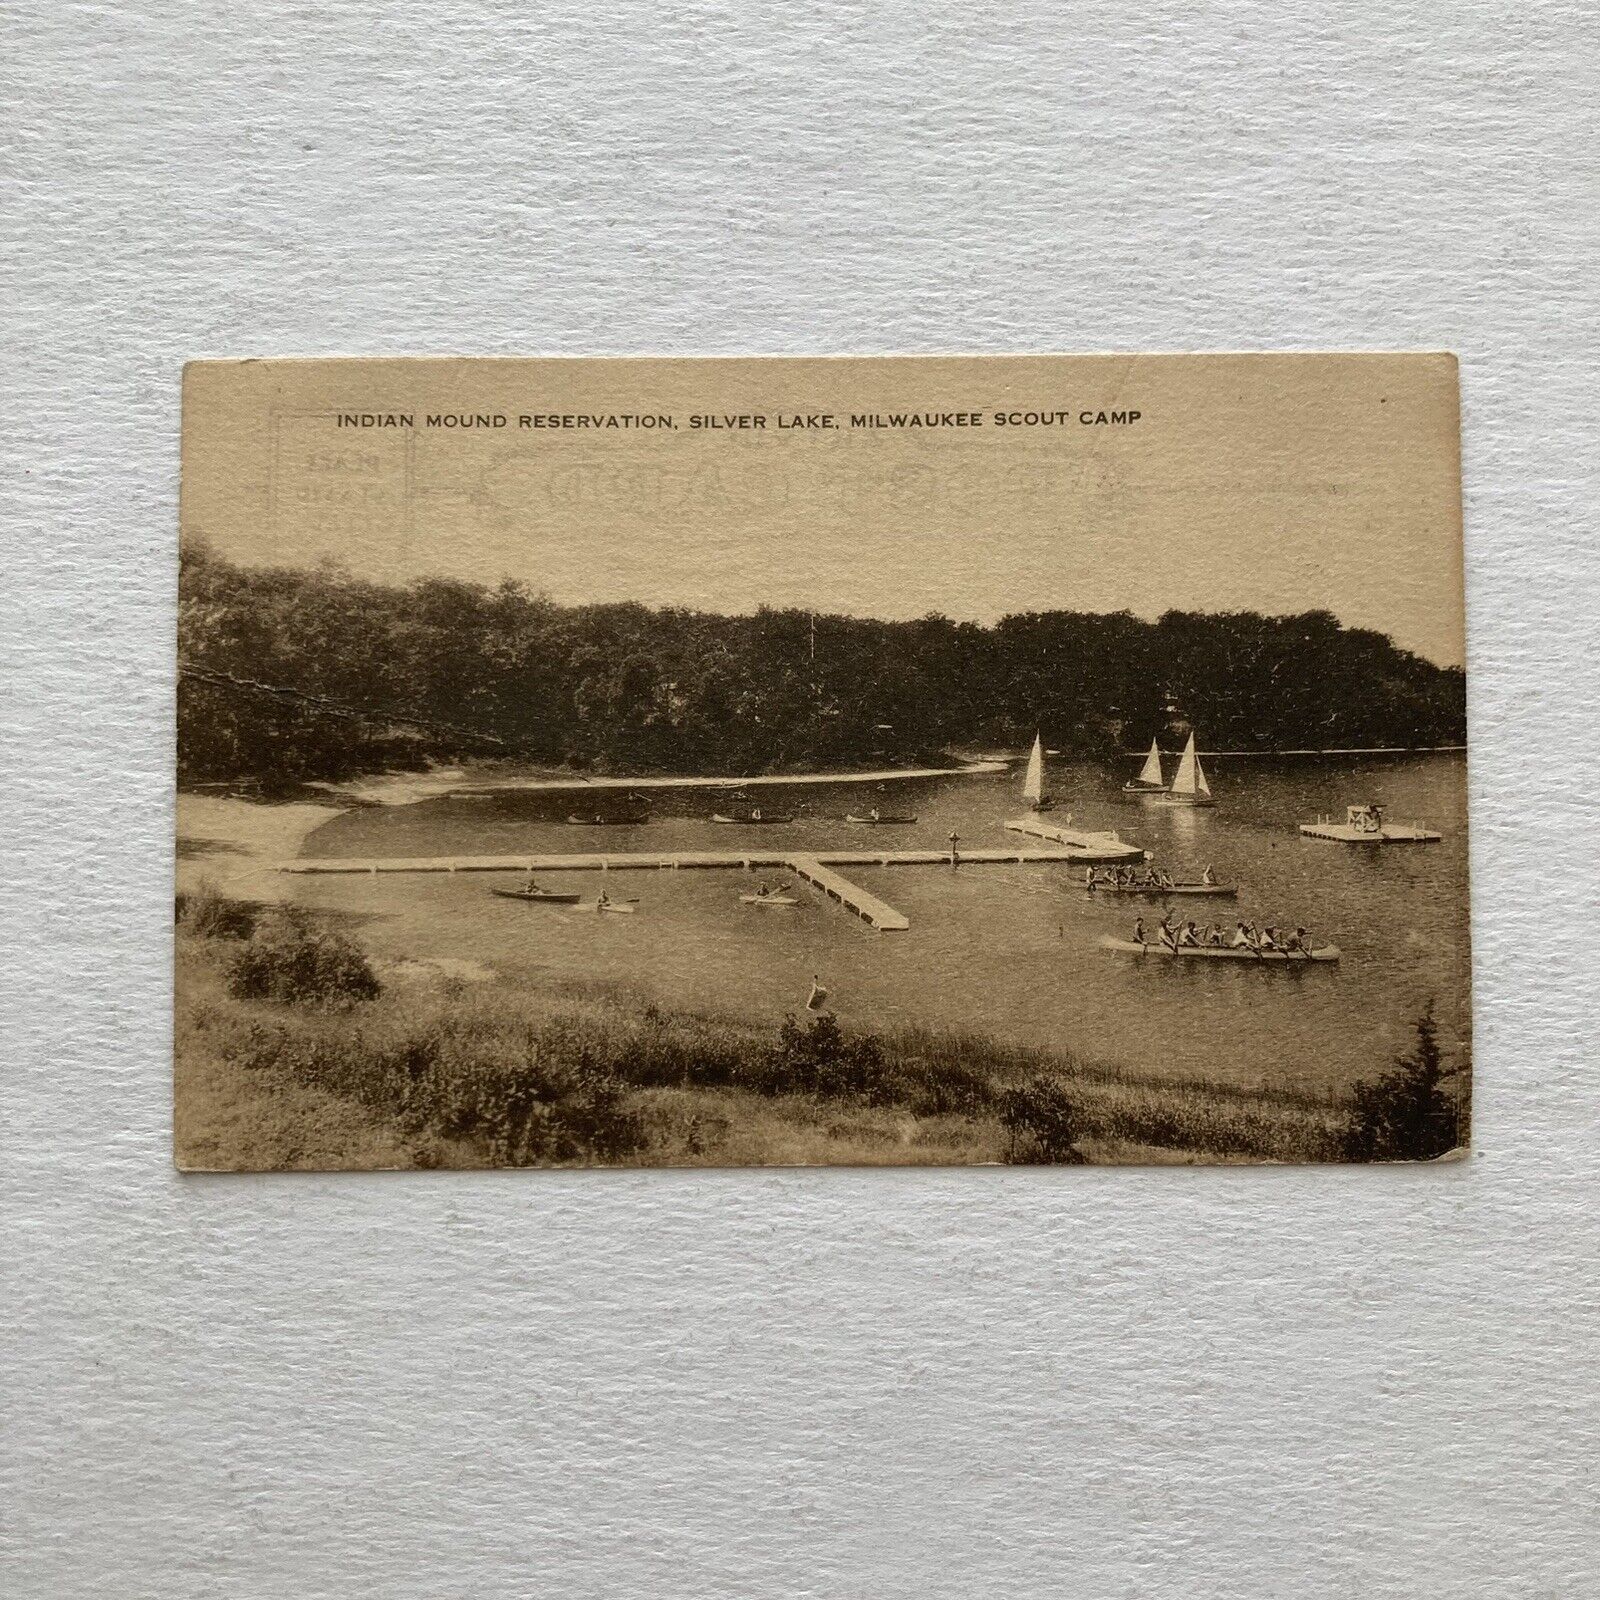 RPPC Indian Mound Reservation Silver Lake Milwaukee Scout Camp Vintage PC 1936